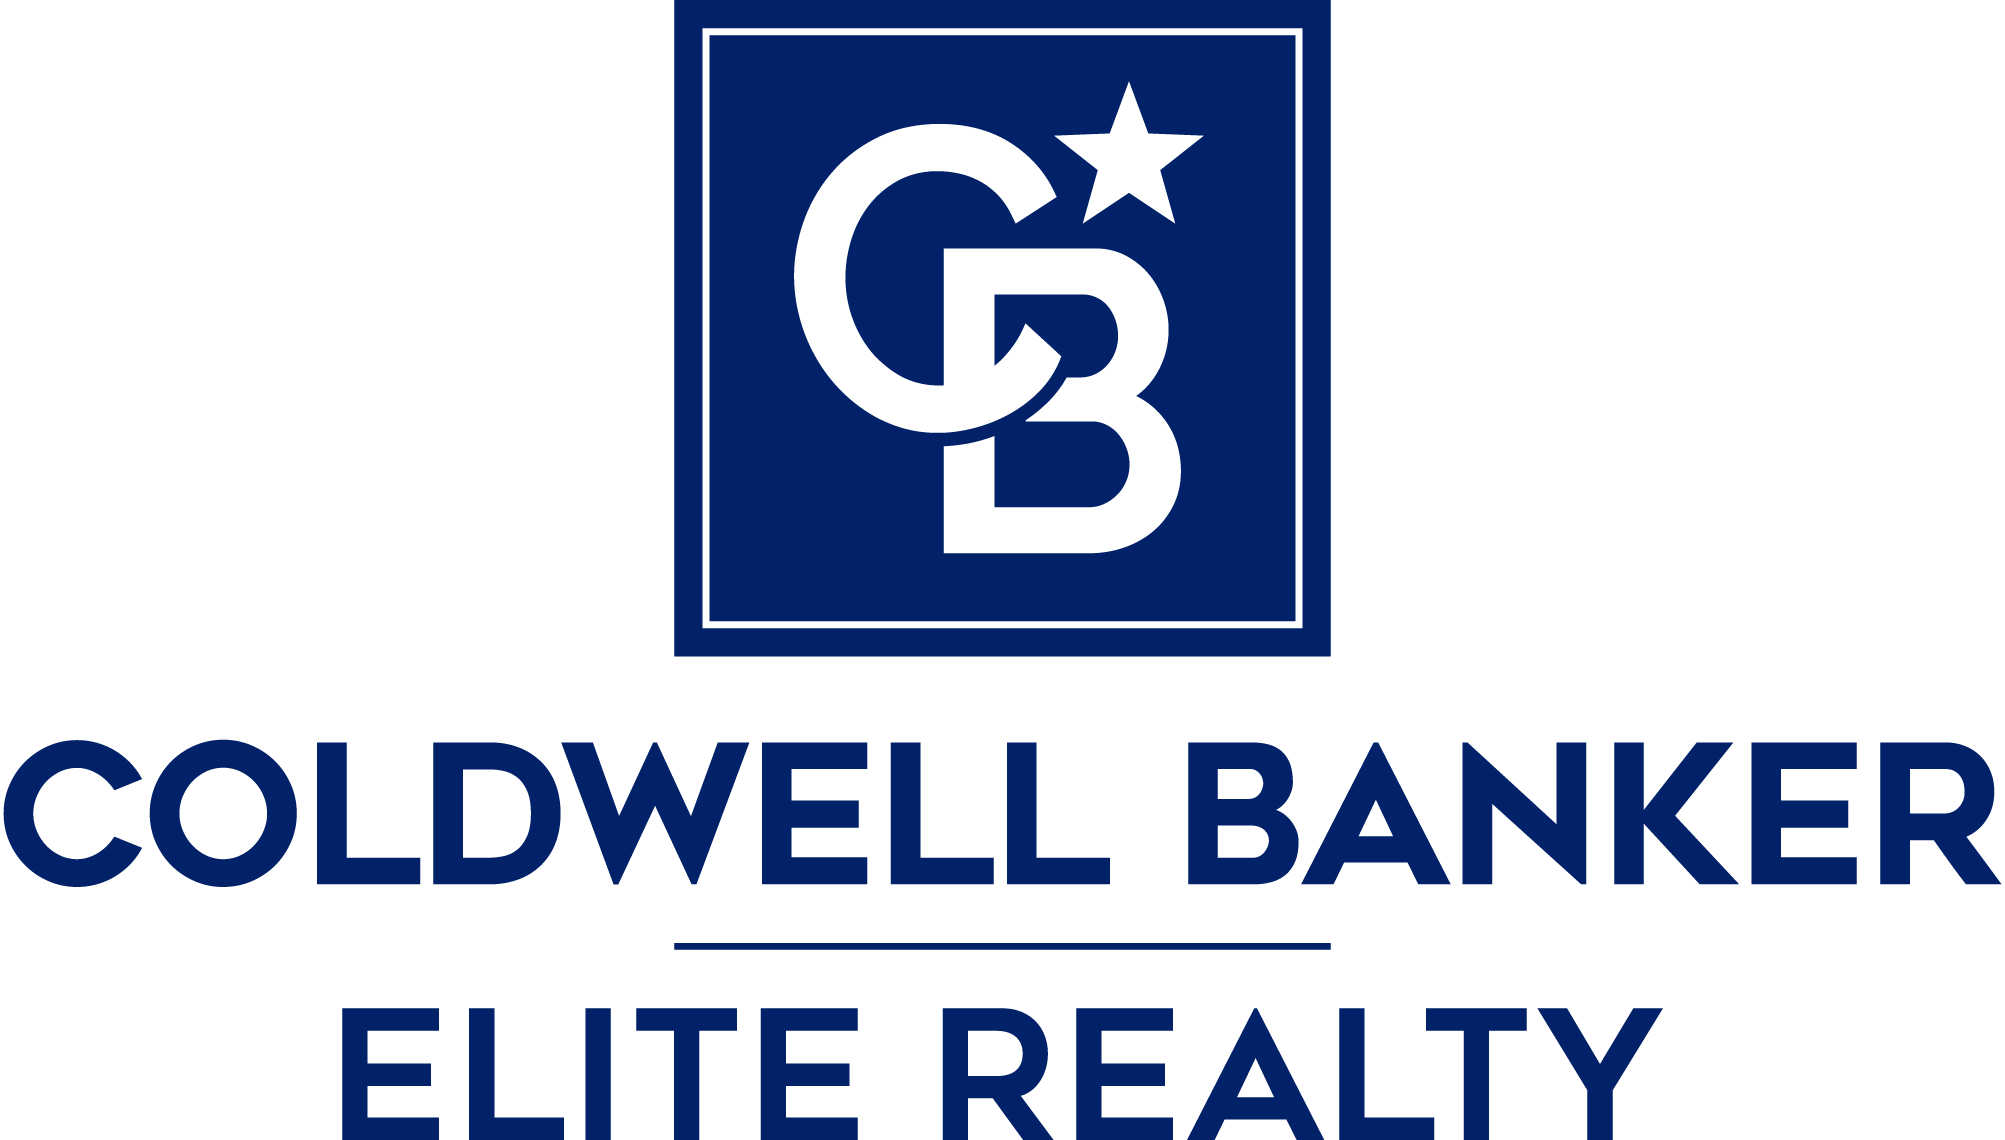 Coldwell Banker Elite Realty